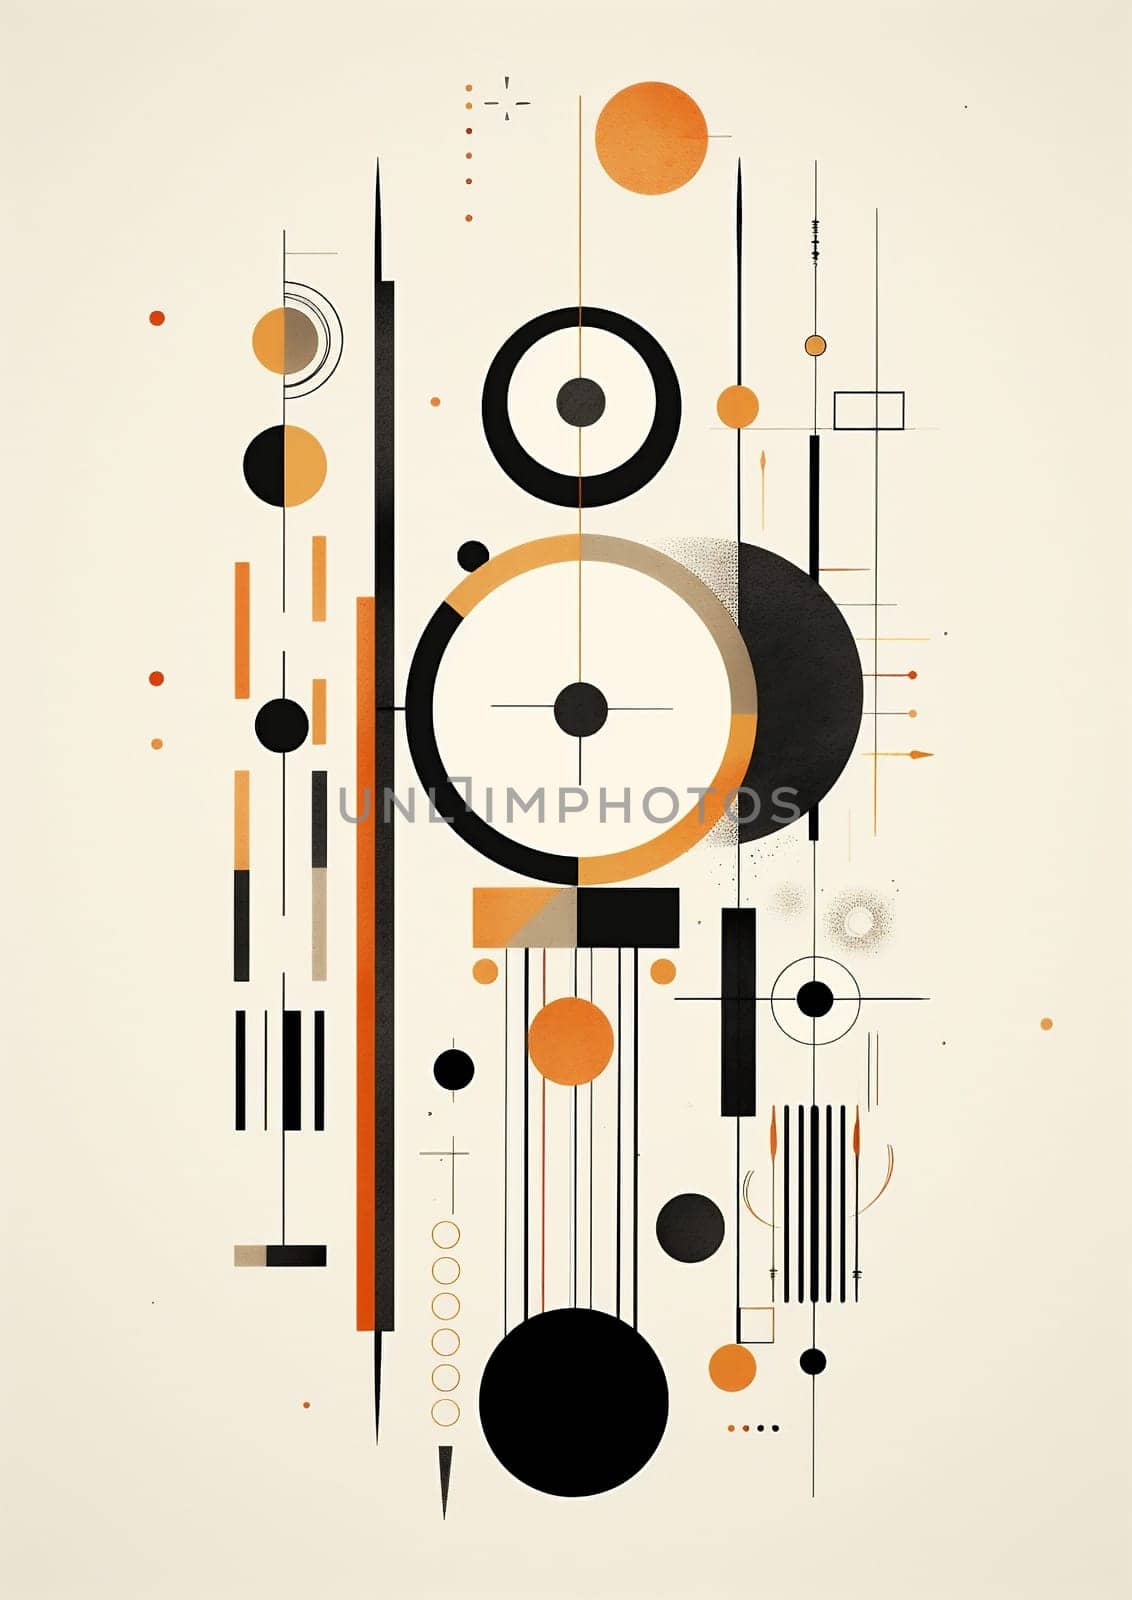 Pattern modern circle graphic background shapes geometric illustration design abstraction by Vichizh